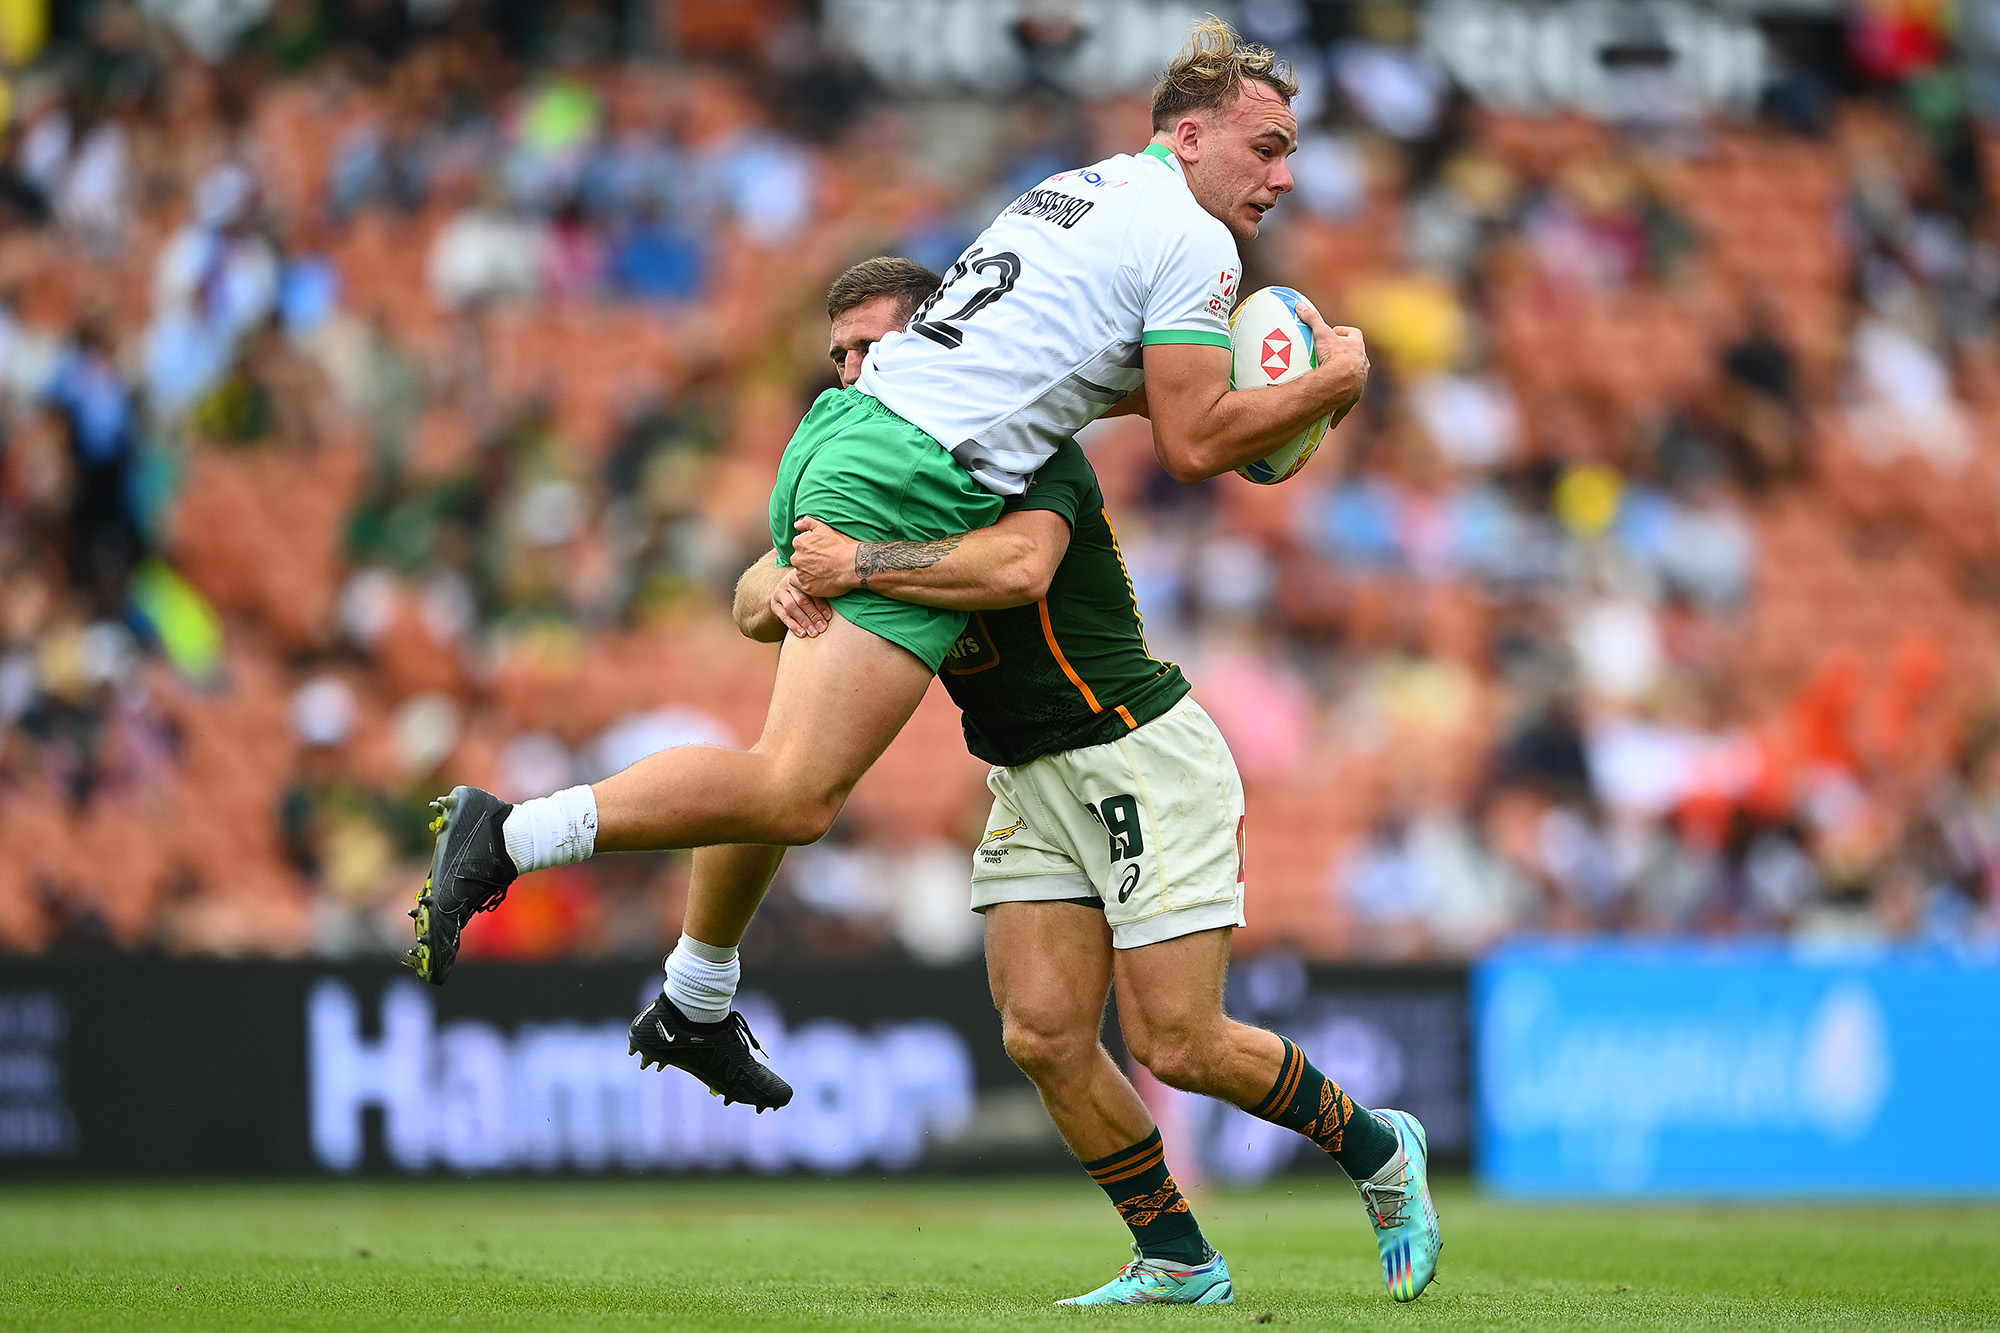 Niall Comerford of Ireland is tackled by Ricardo Duarttee, New Zealand